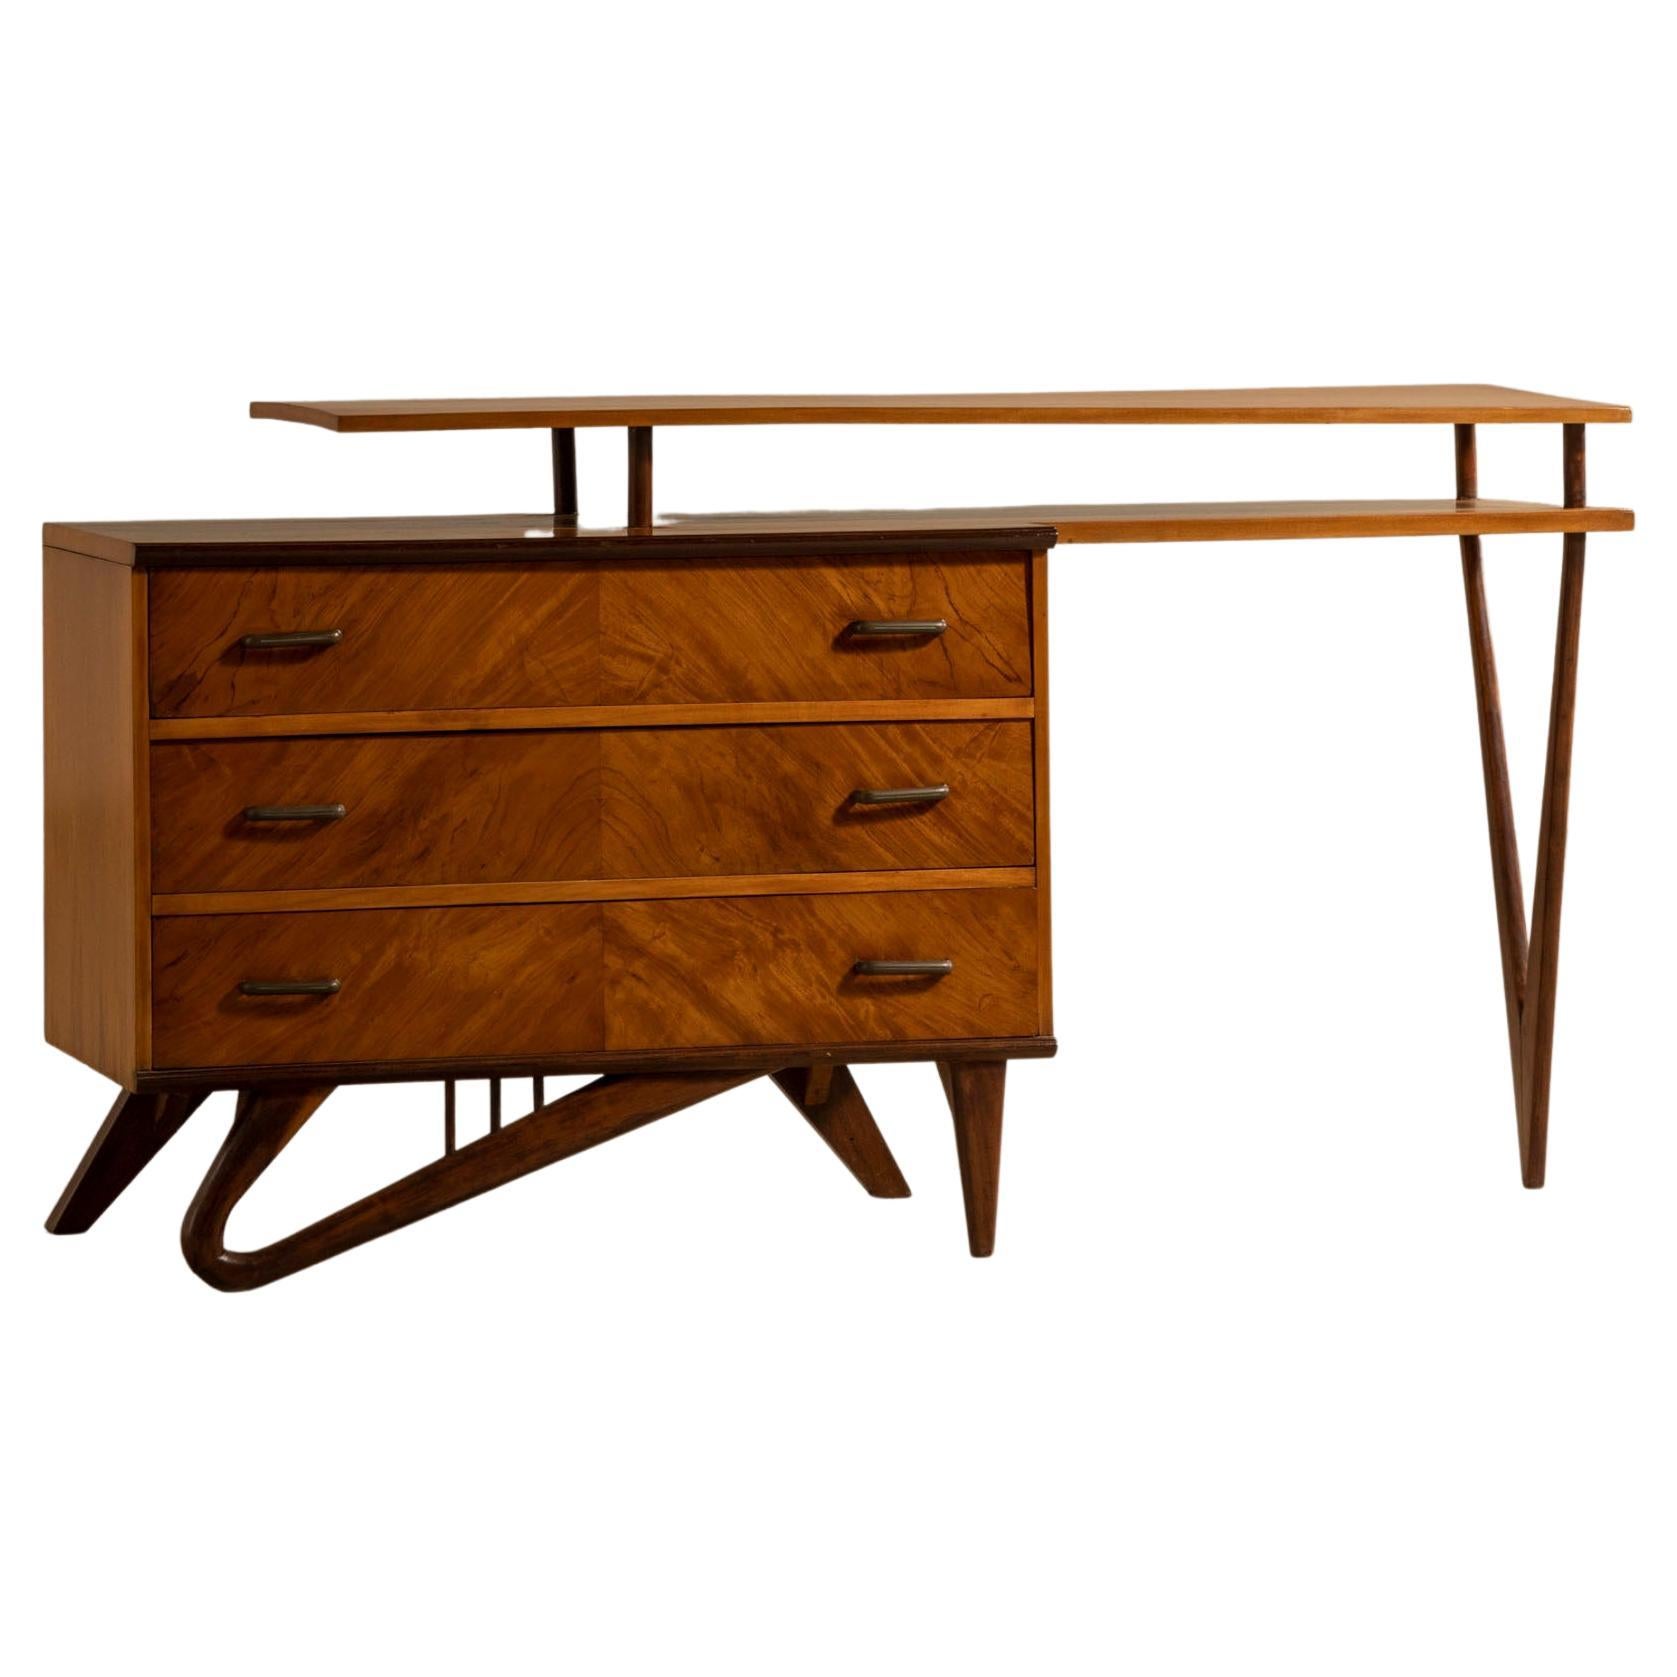 Sculptural Sideboard in Caviúna Wood, Giuseppe Scapinelli, Brazilian Midcentury For Sale